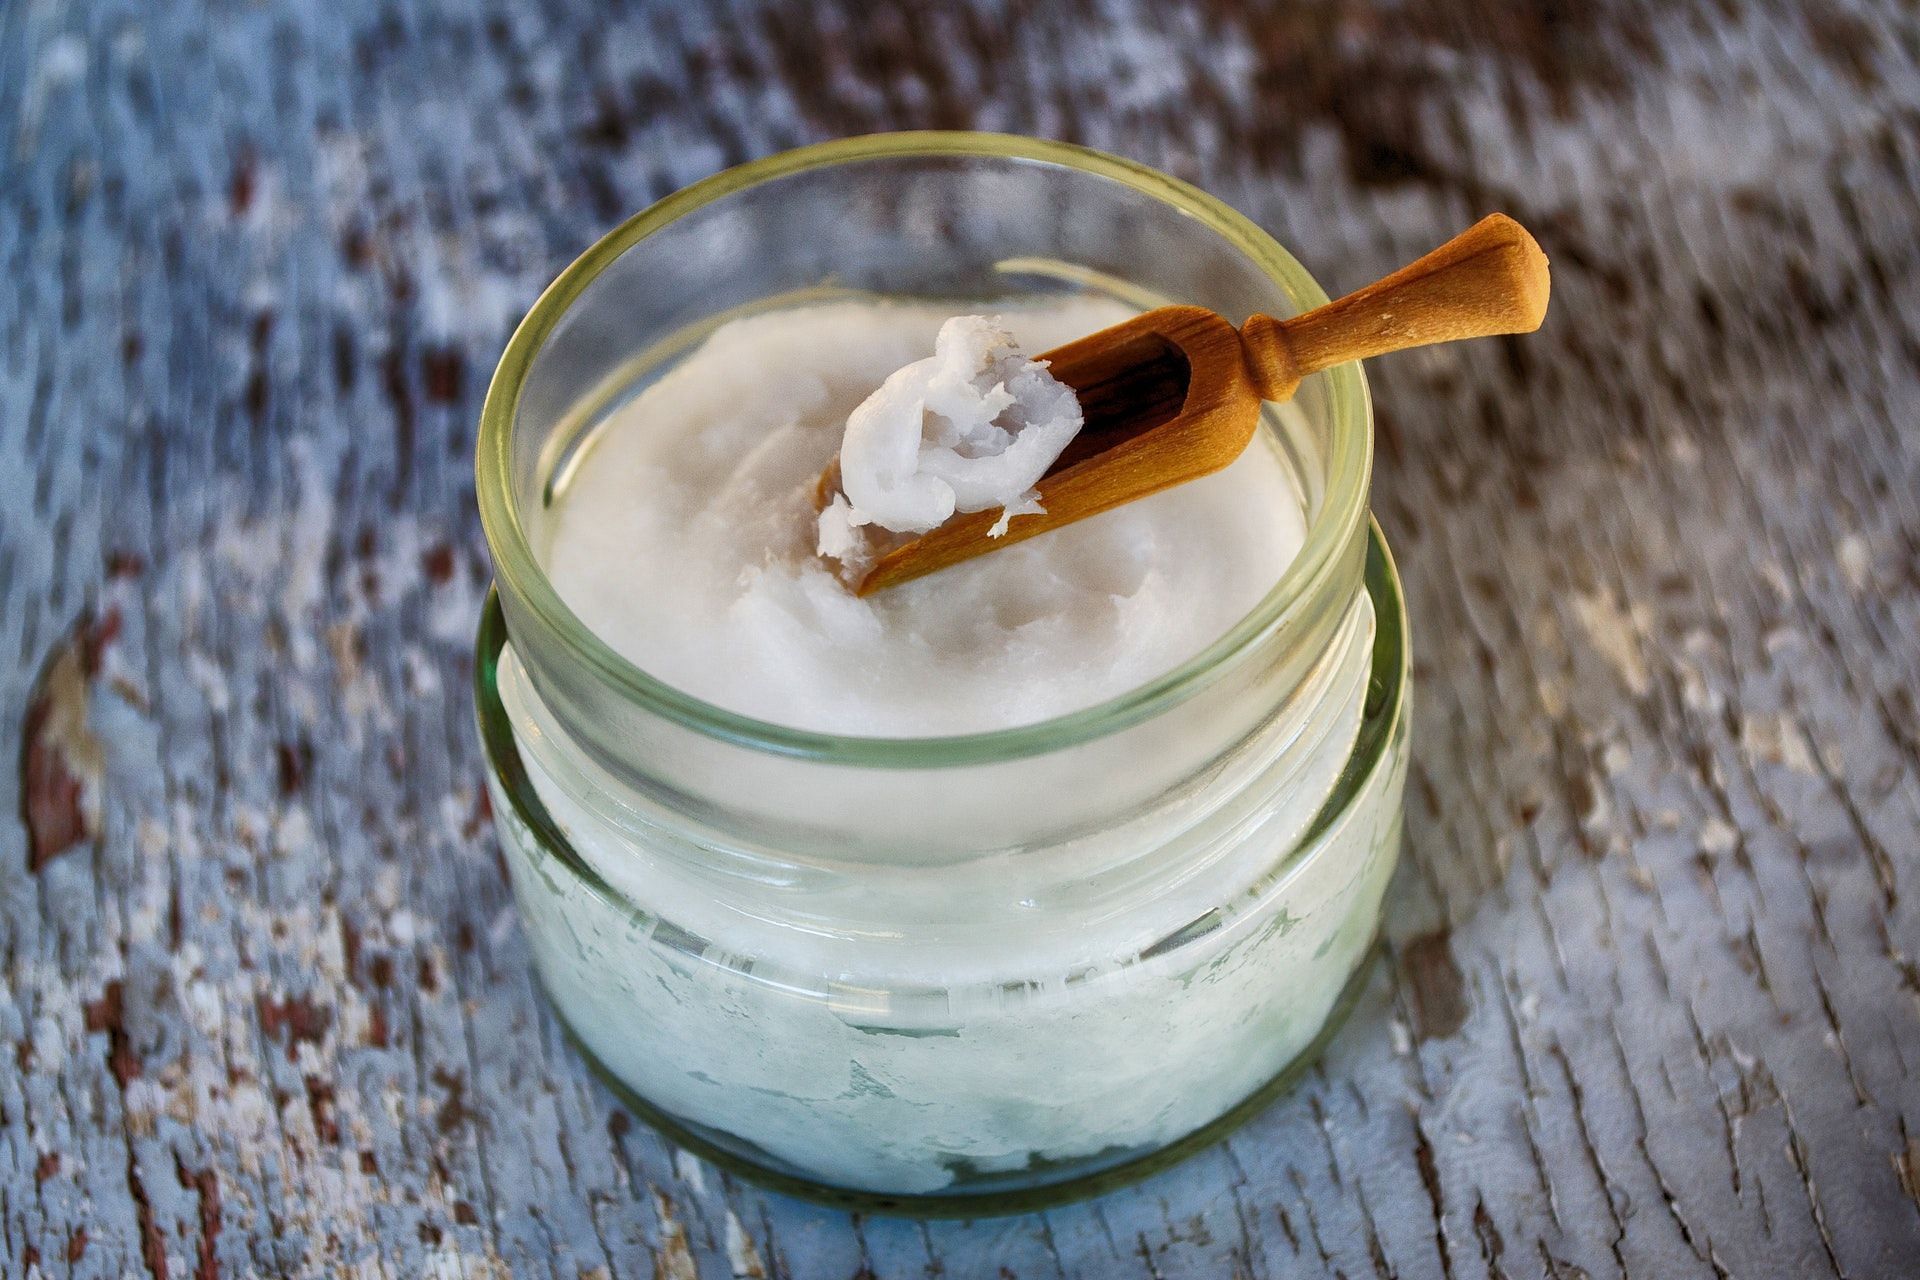  Health benefits of coconut oil and possible allergies. (Photo by Dana Tentis via pexels)